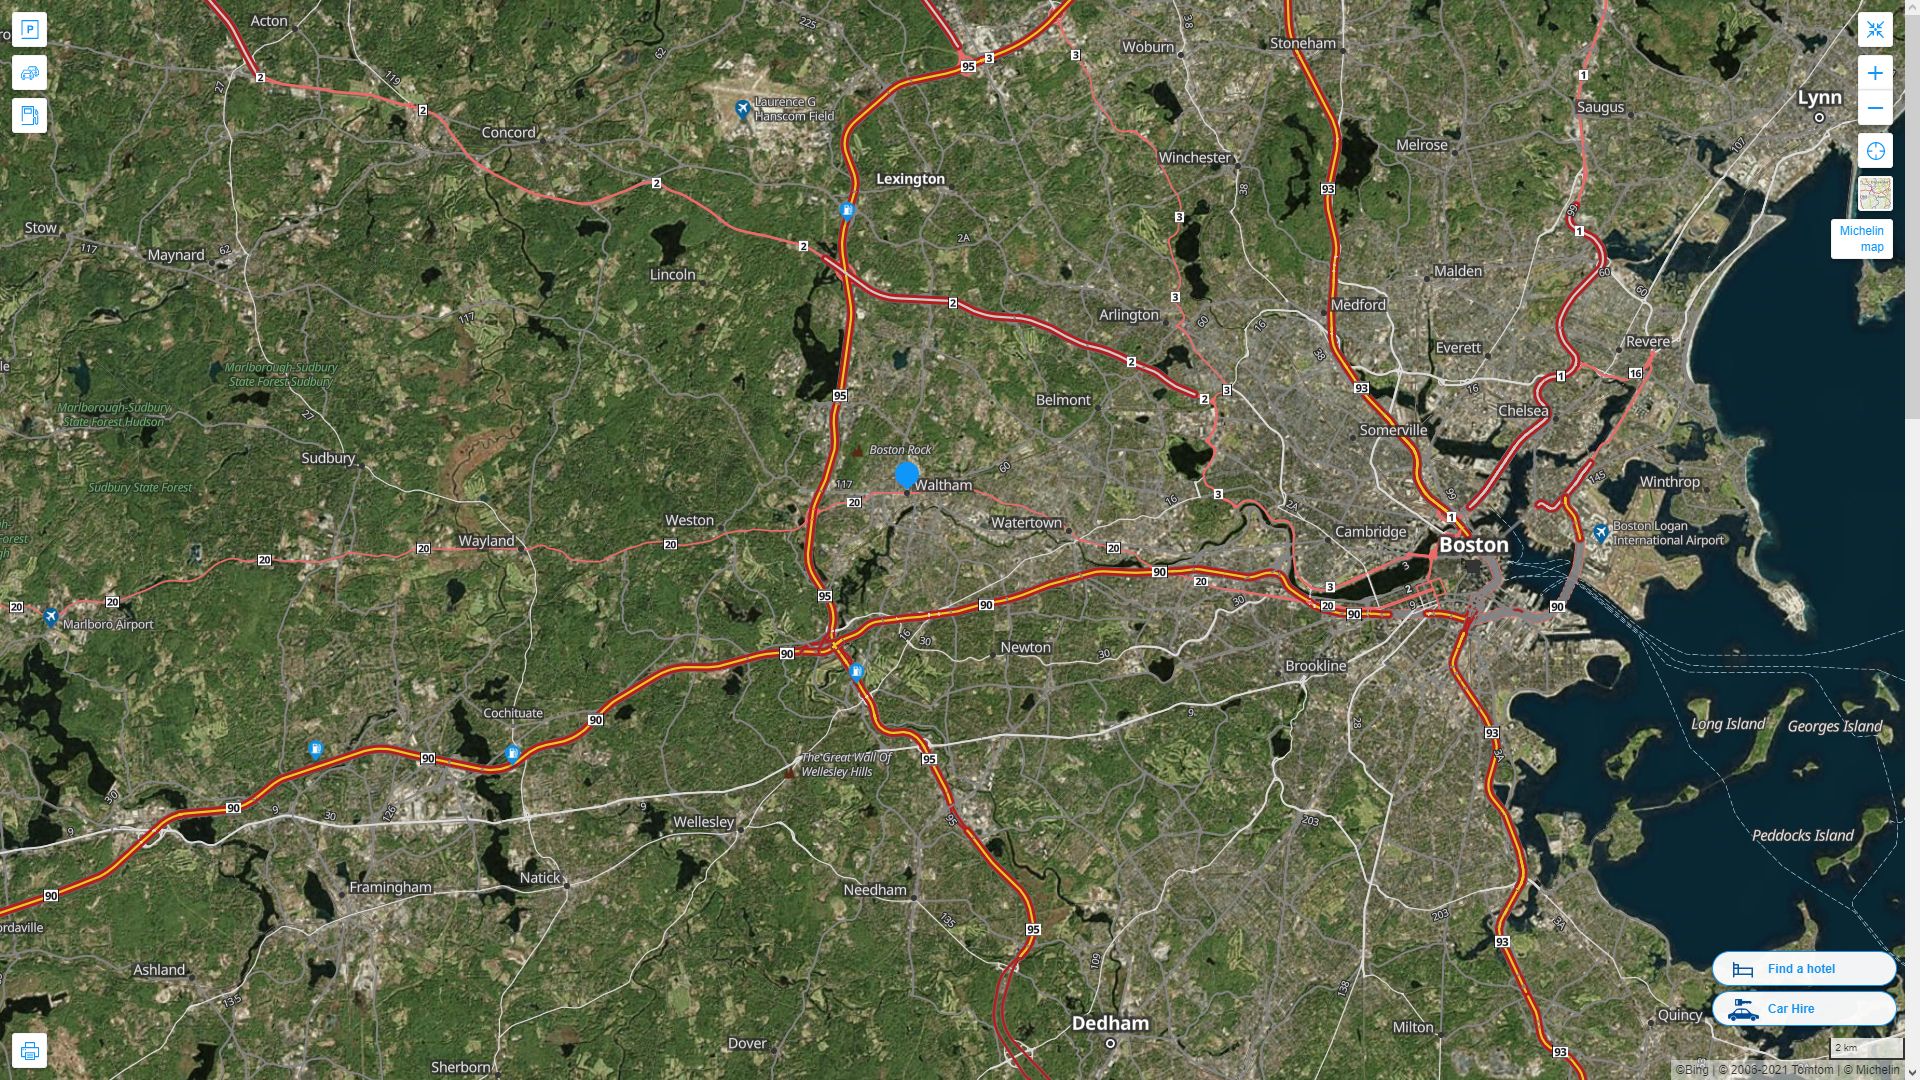 Waltham Massachusetts Highway and Road Map with Satellite View